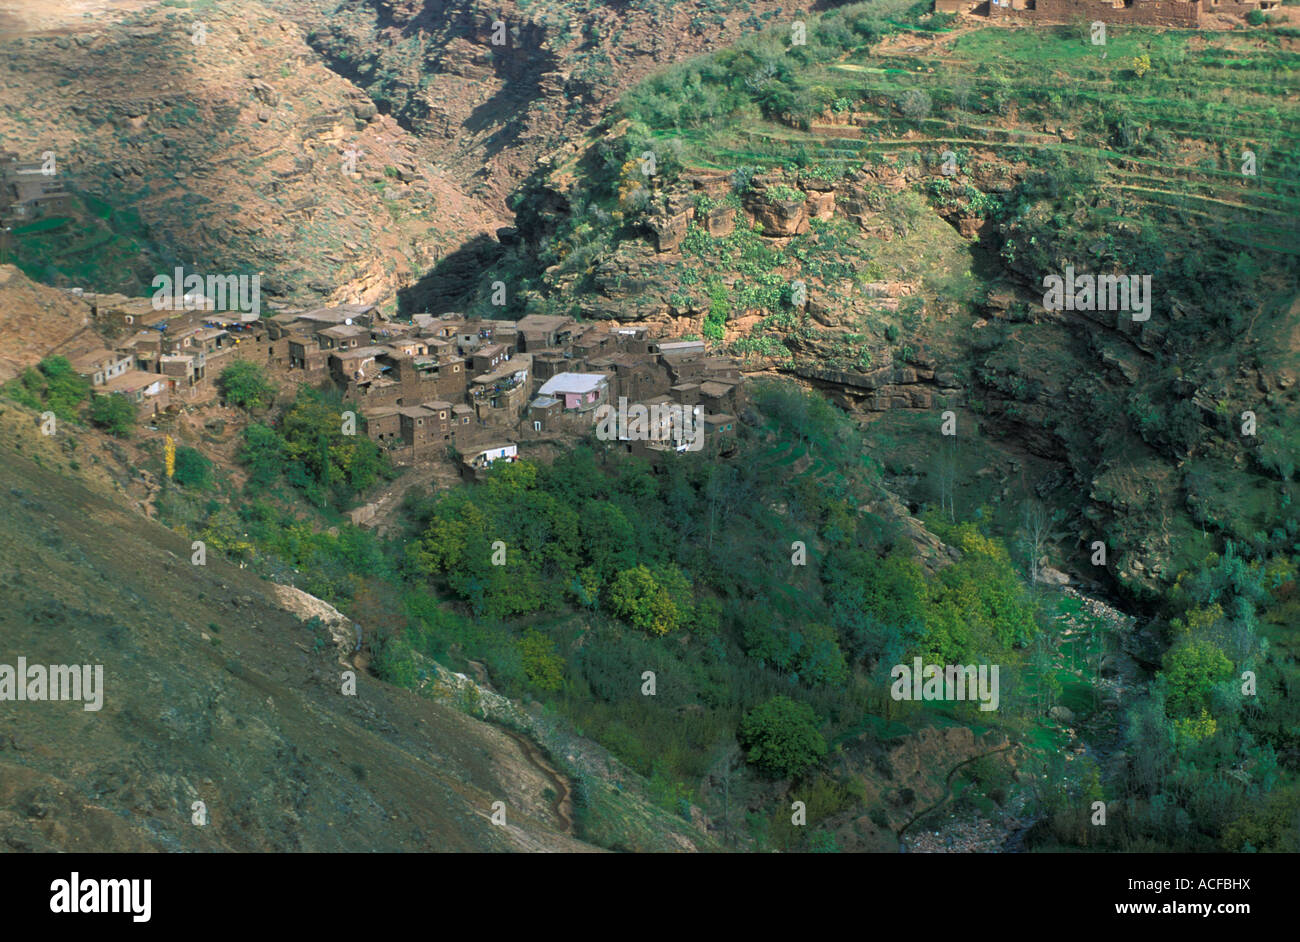 Scenic view of terraced slopes and Berber village near skiing village of Oukaimeden, Atlas Mountains; Morocco Stock Photo